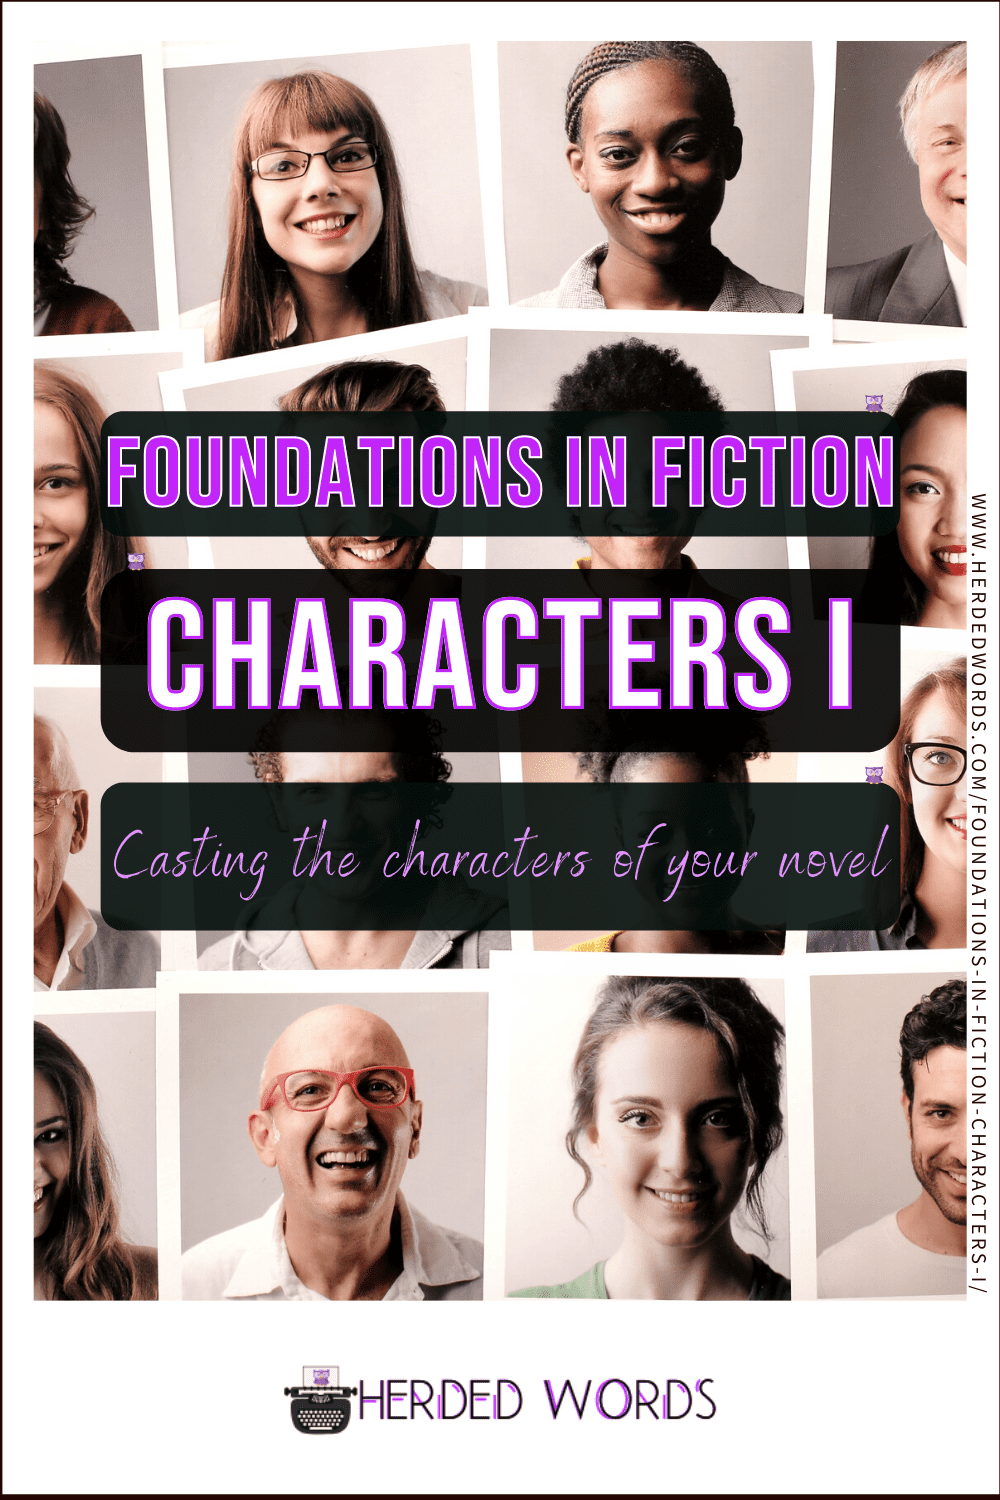 Image Link to Foundations in Fiction: Character I (casting the characters of your novel)